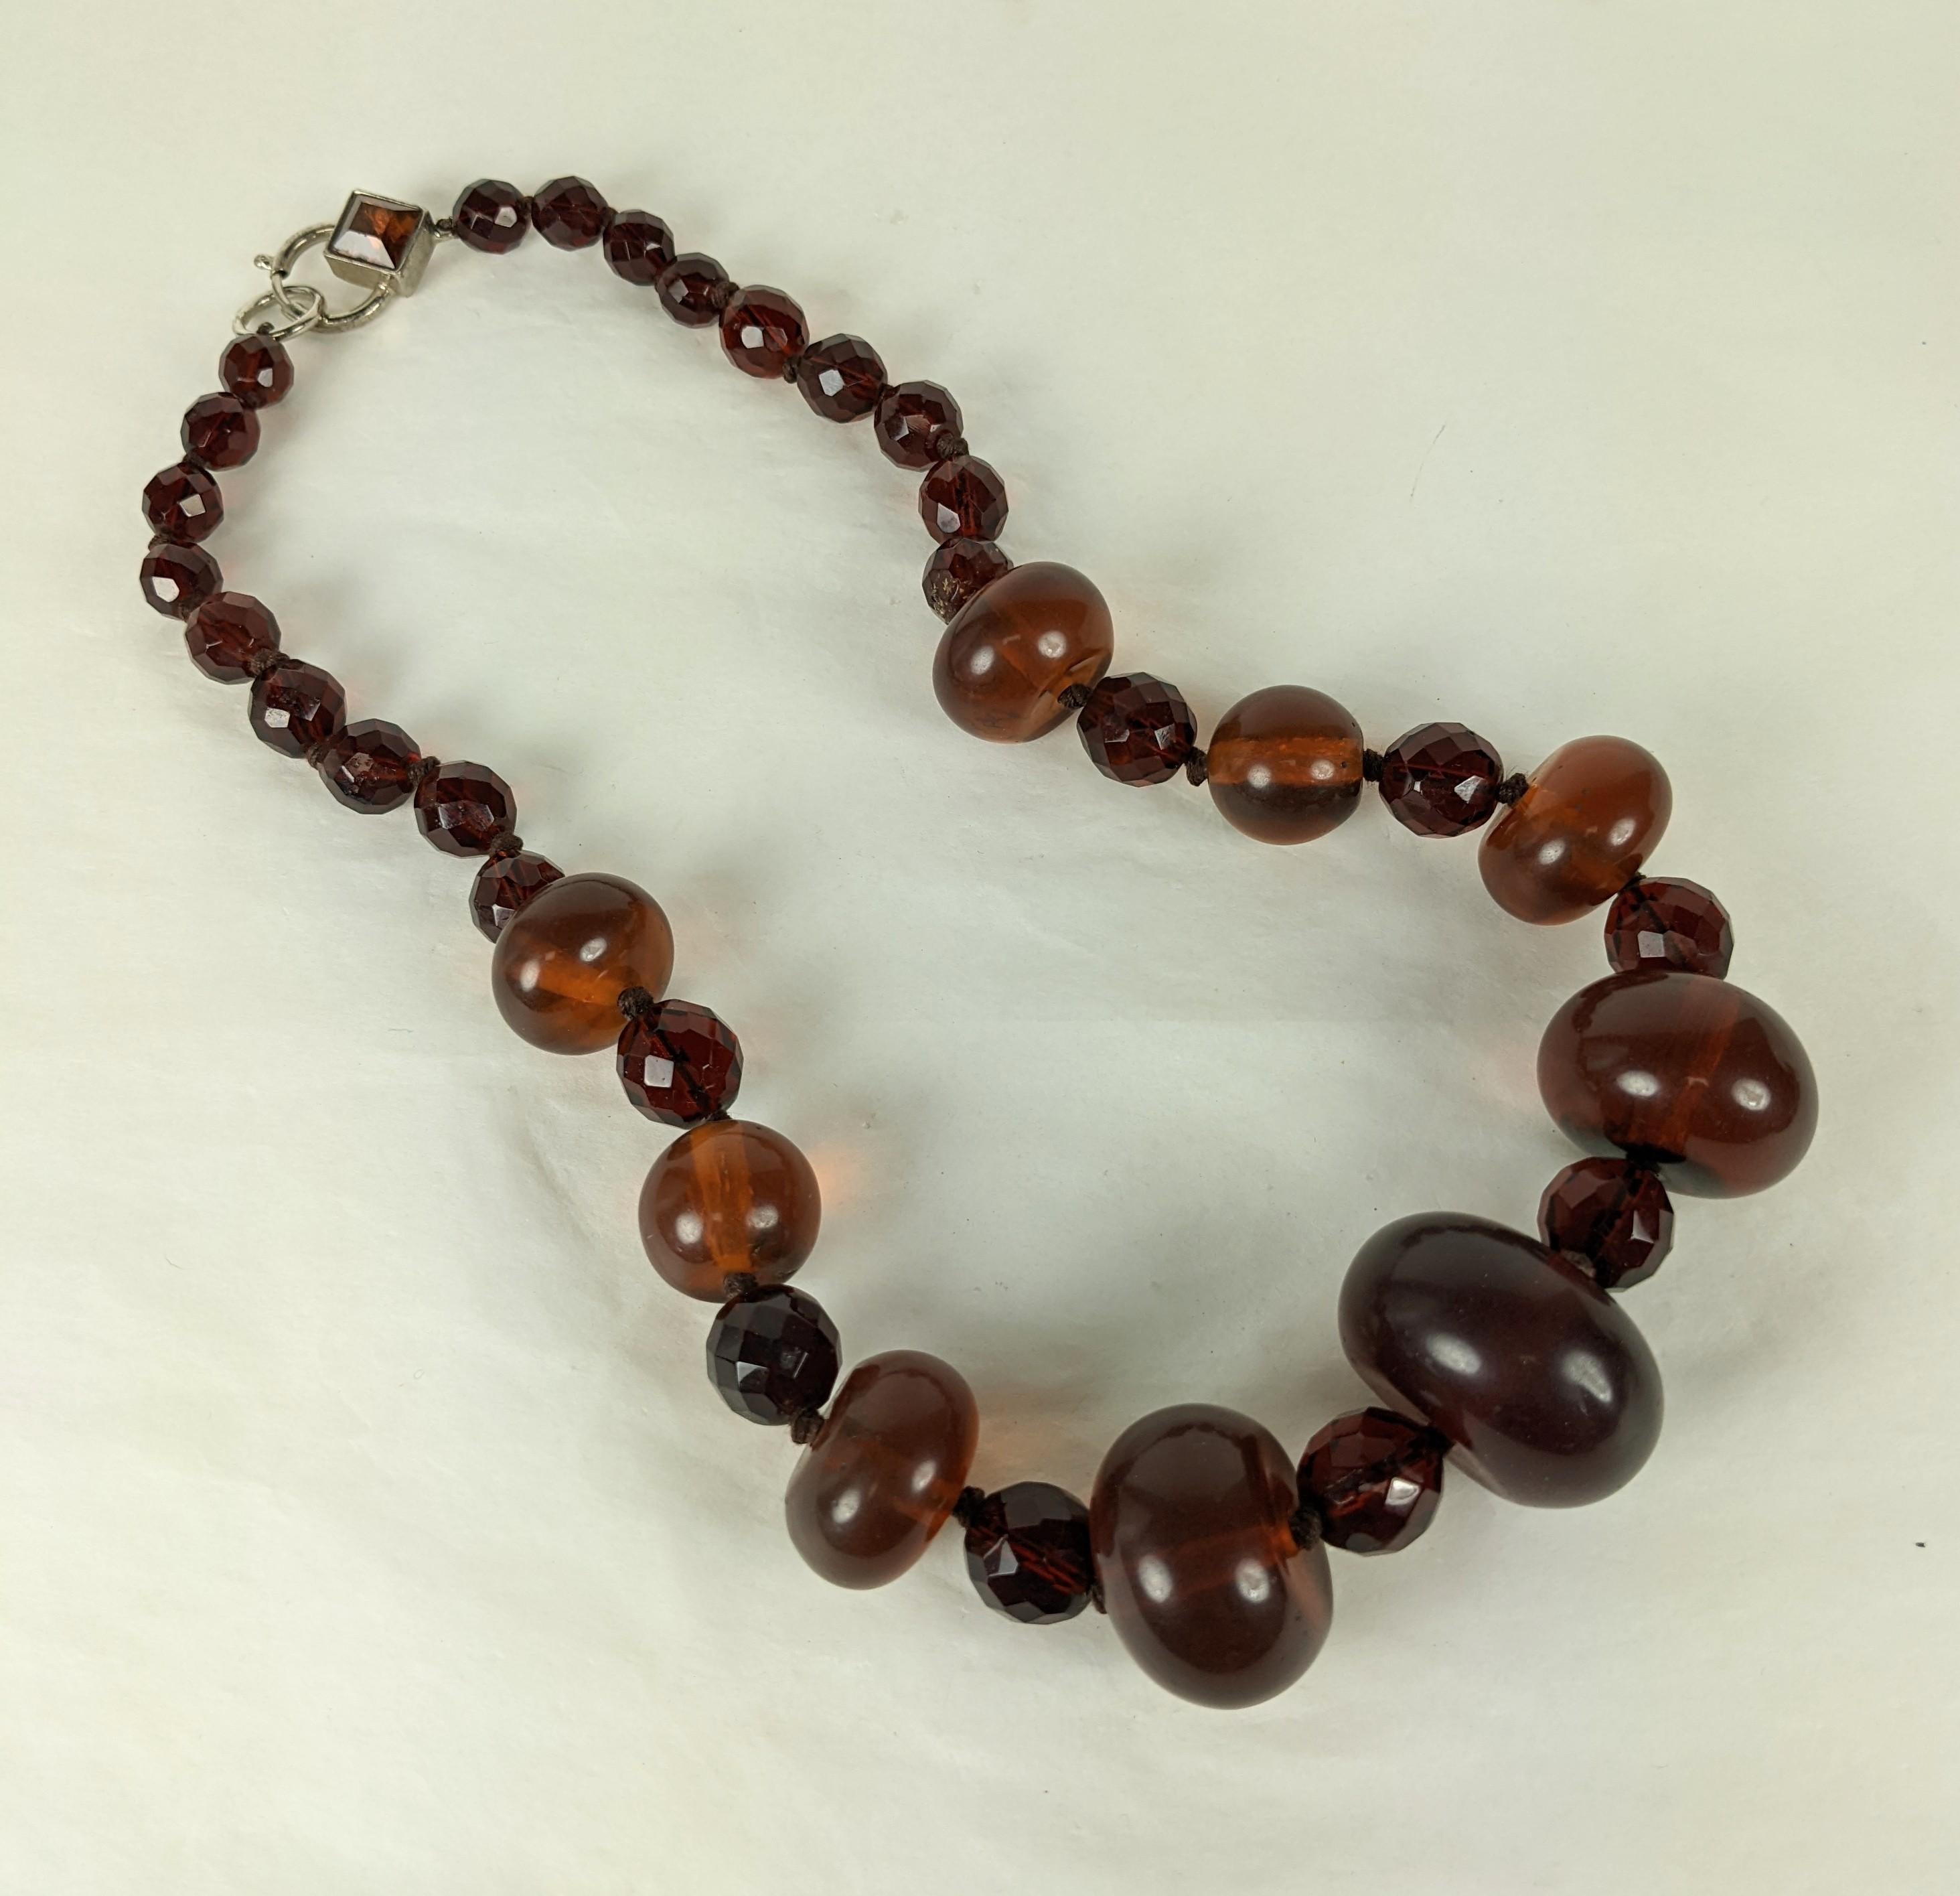 Striking Italian Faux Amber Bead Necklace from the 1980's. Italy is known for its amazing resin and bakelite jewelry. There are different sized beads with faceted bead spacers which are hand knotted with jewel crystal clasp. Likely Pollini, Italy.